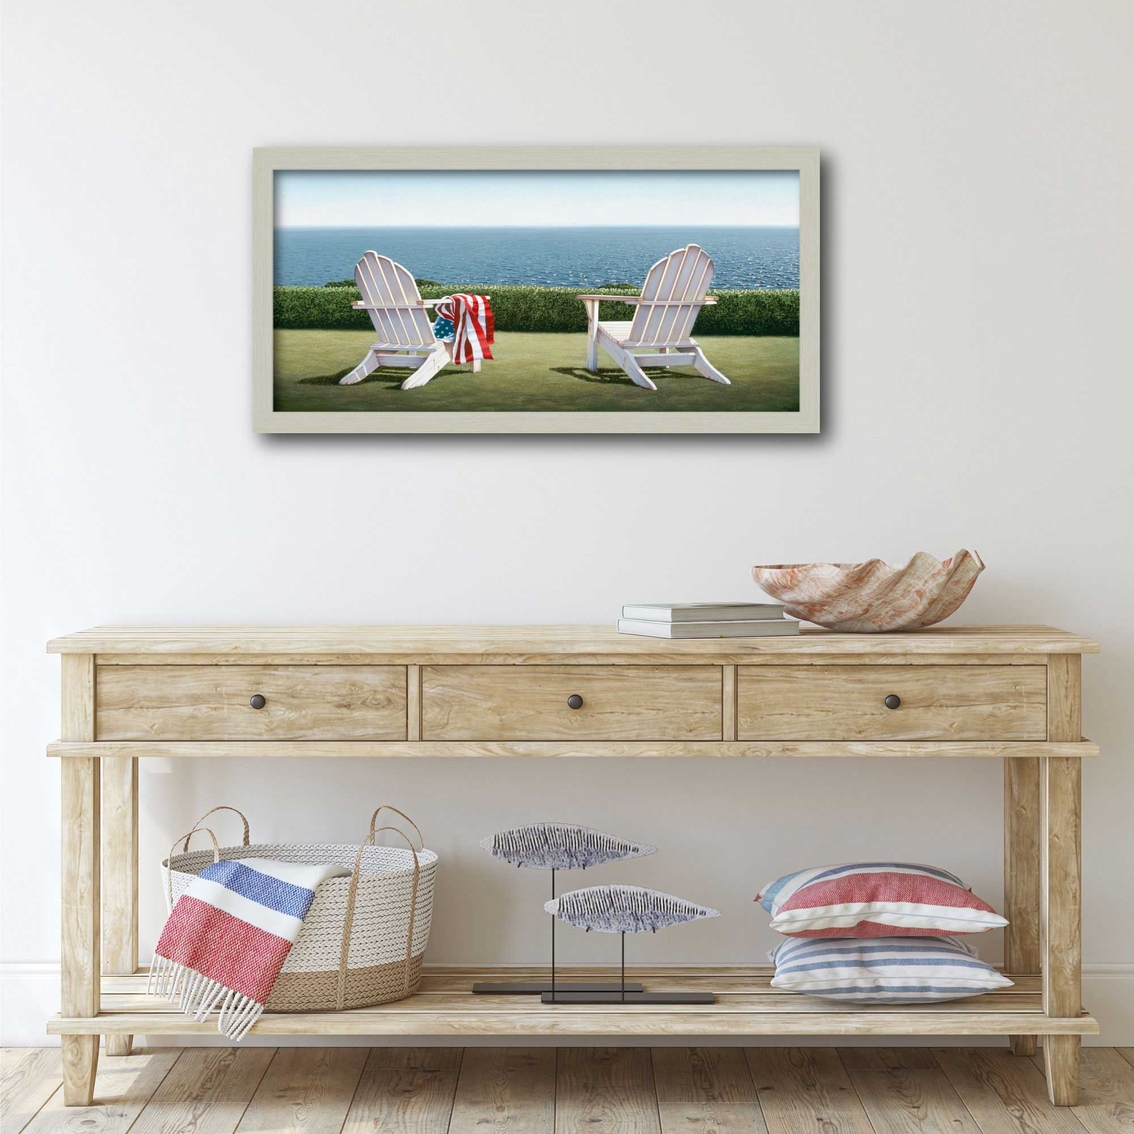 Courtside Market Spring House View Canvas Wall Art - Image 2 of 2